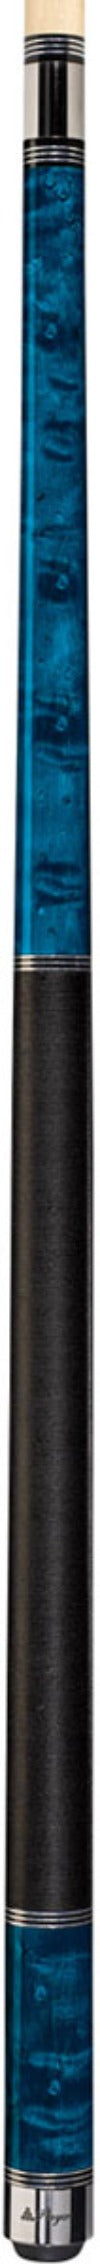 Players C-955 Pool Cue -Players